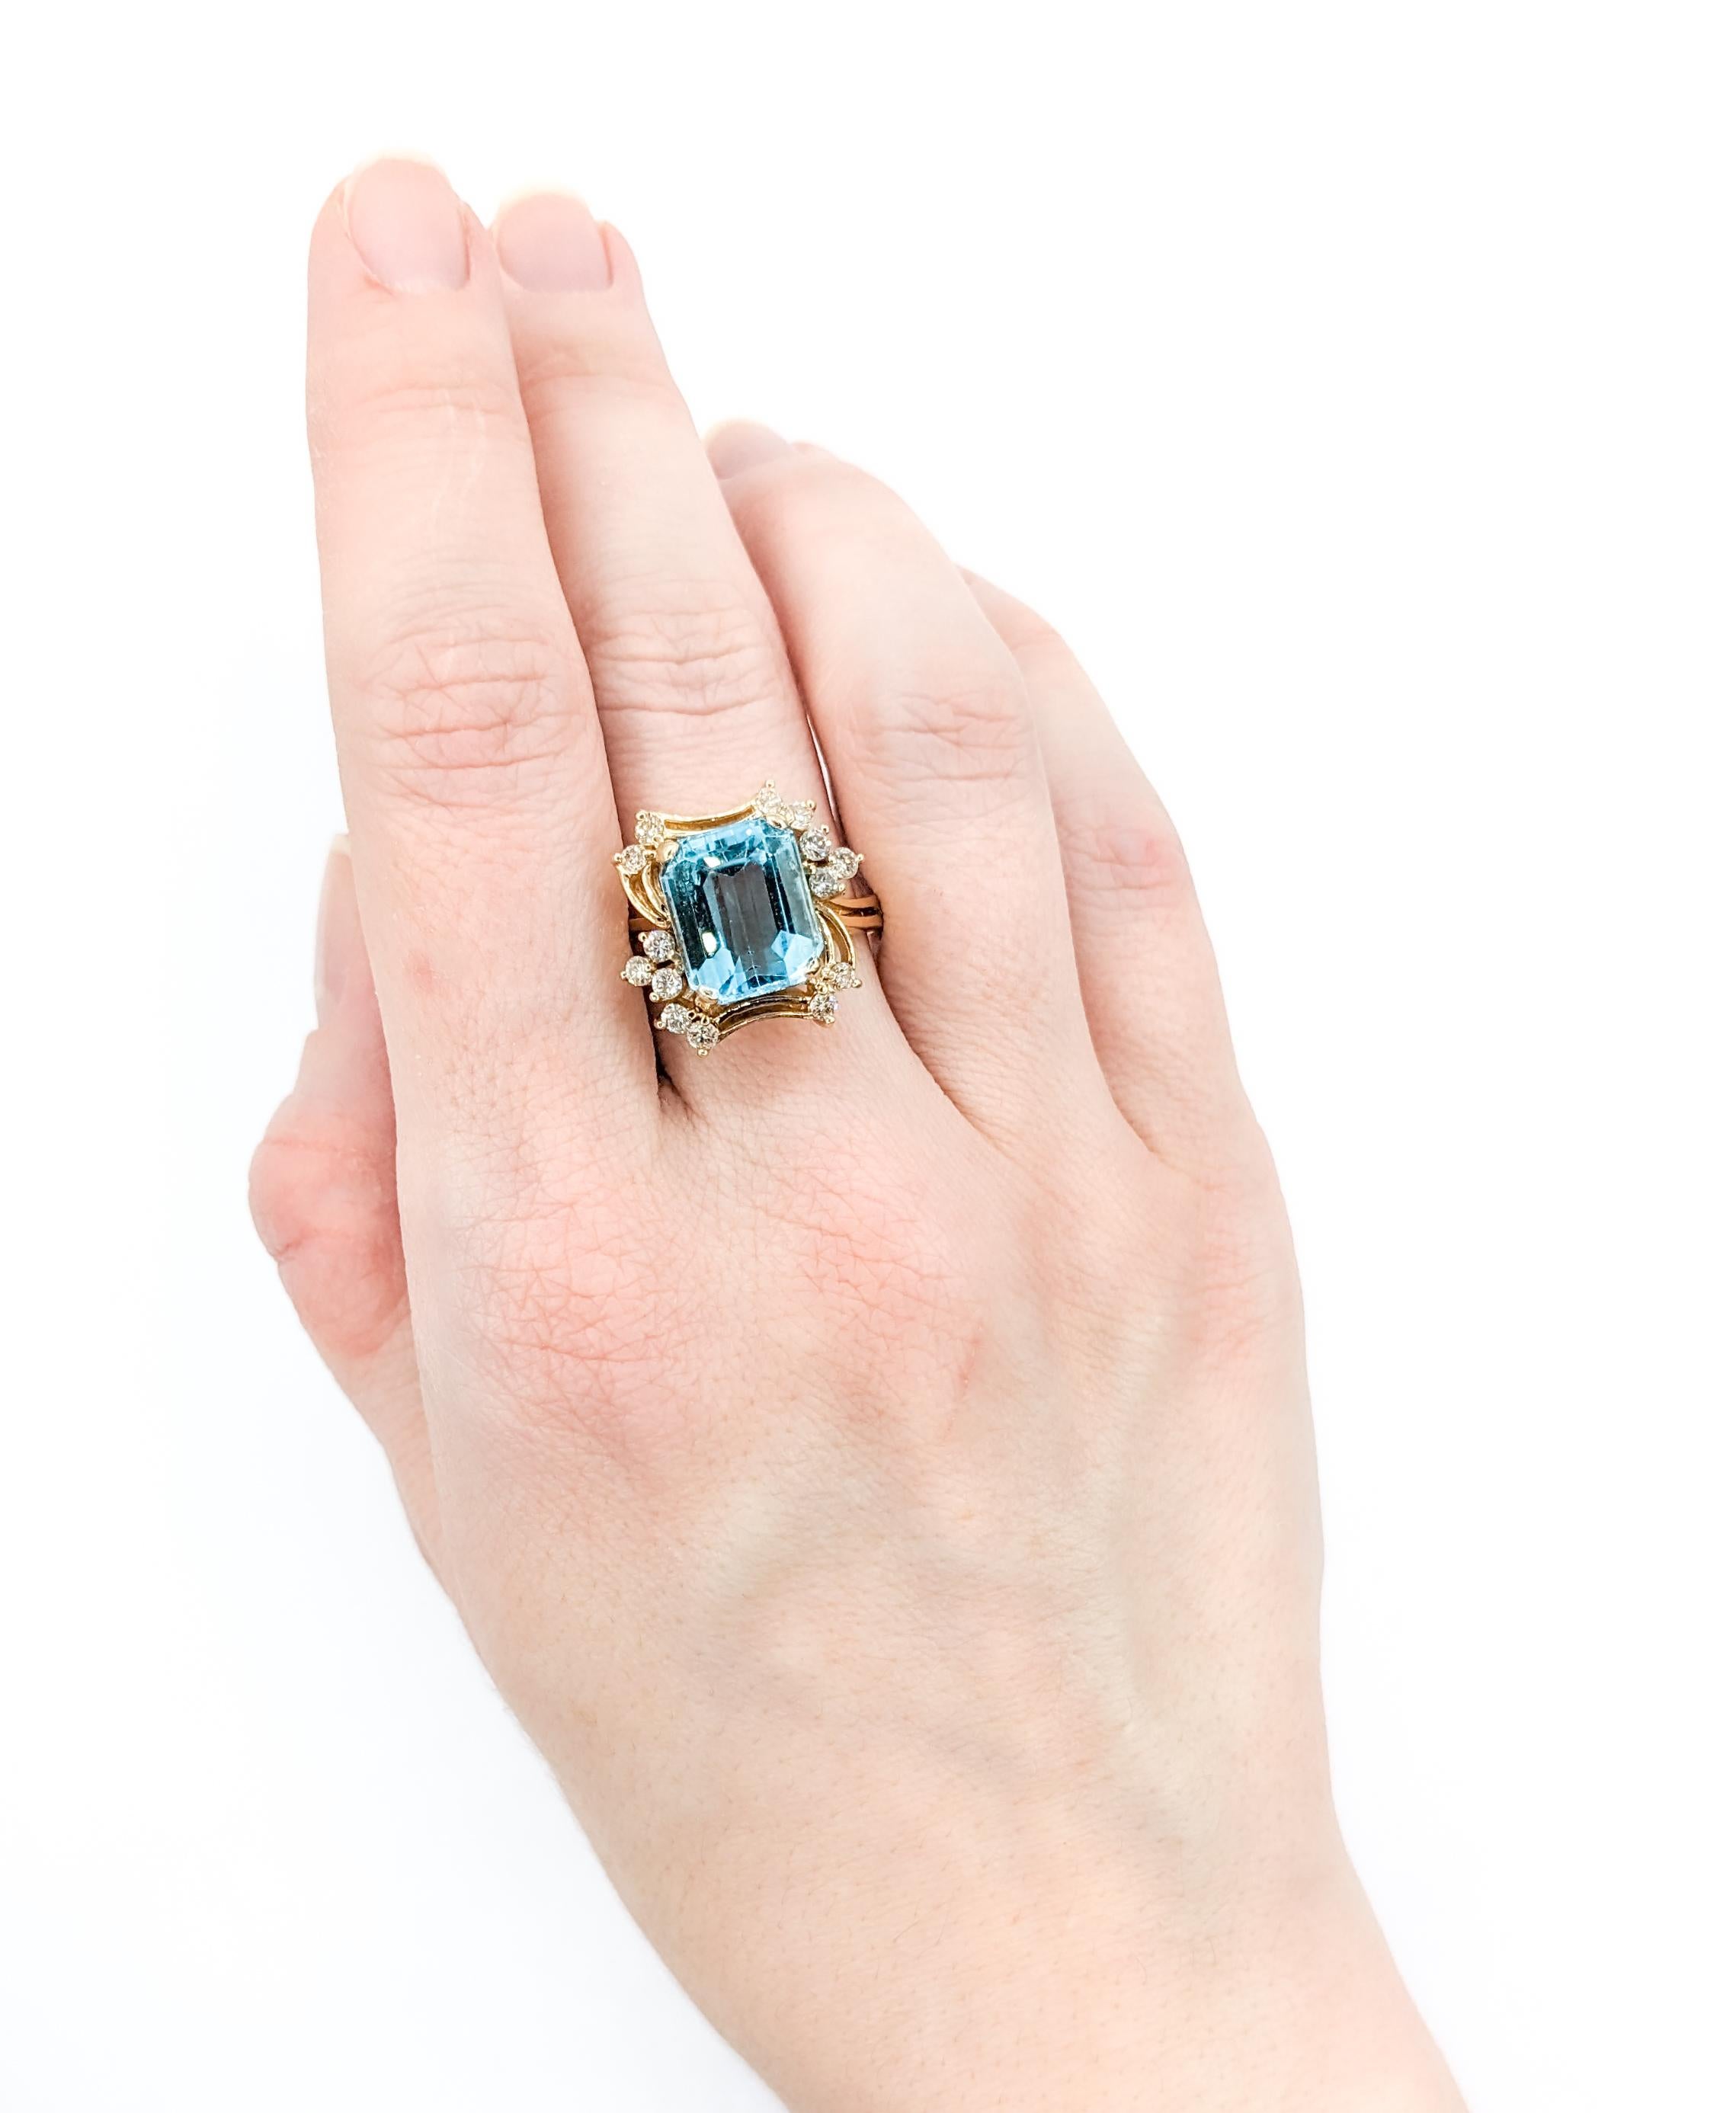 For Sale:  5.5ctBlue Topaz & Disamond Ring In Yellow Gold 3